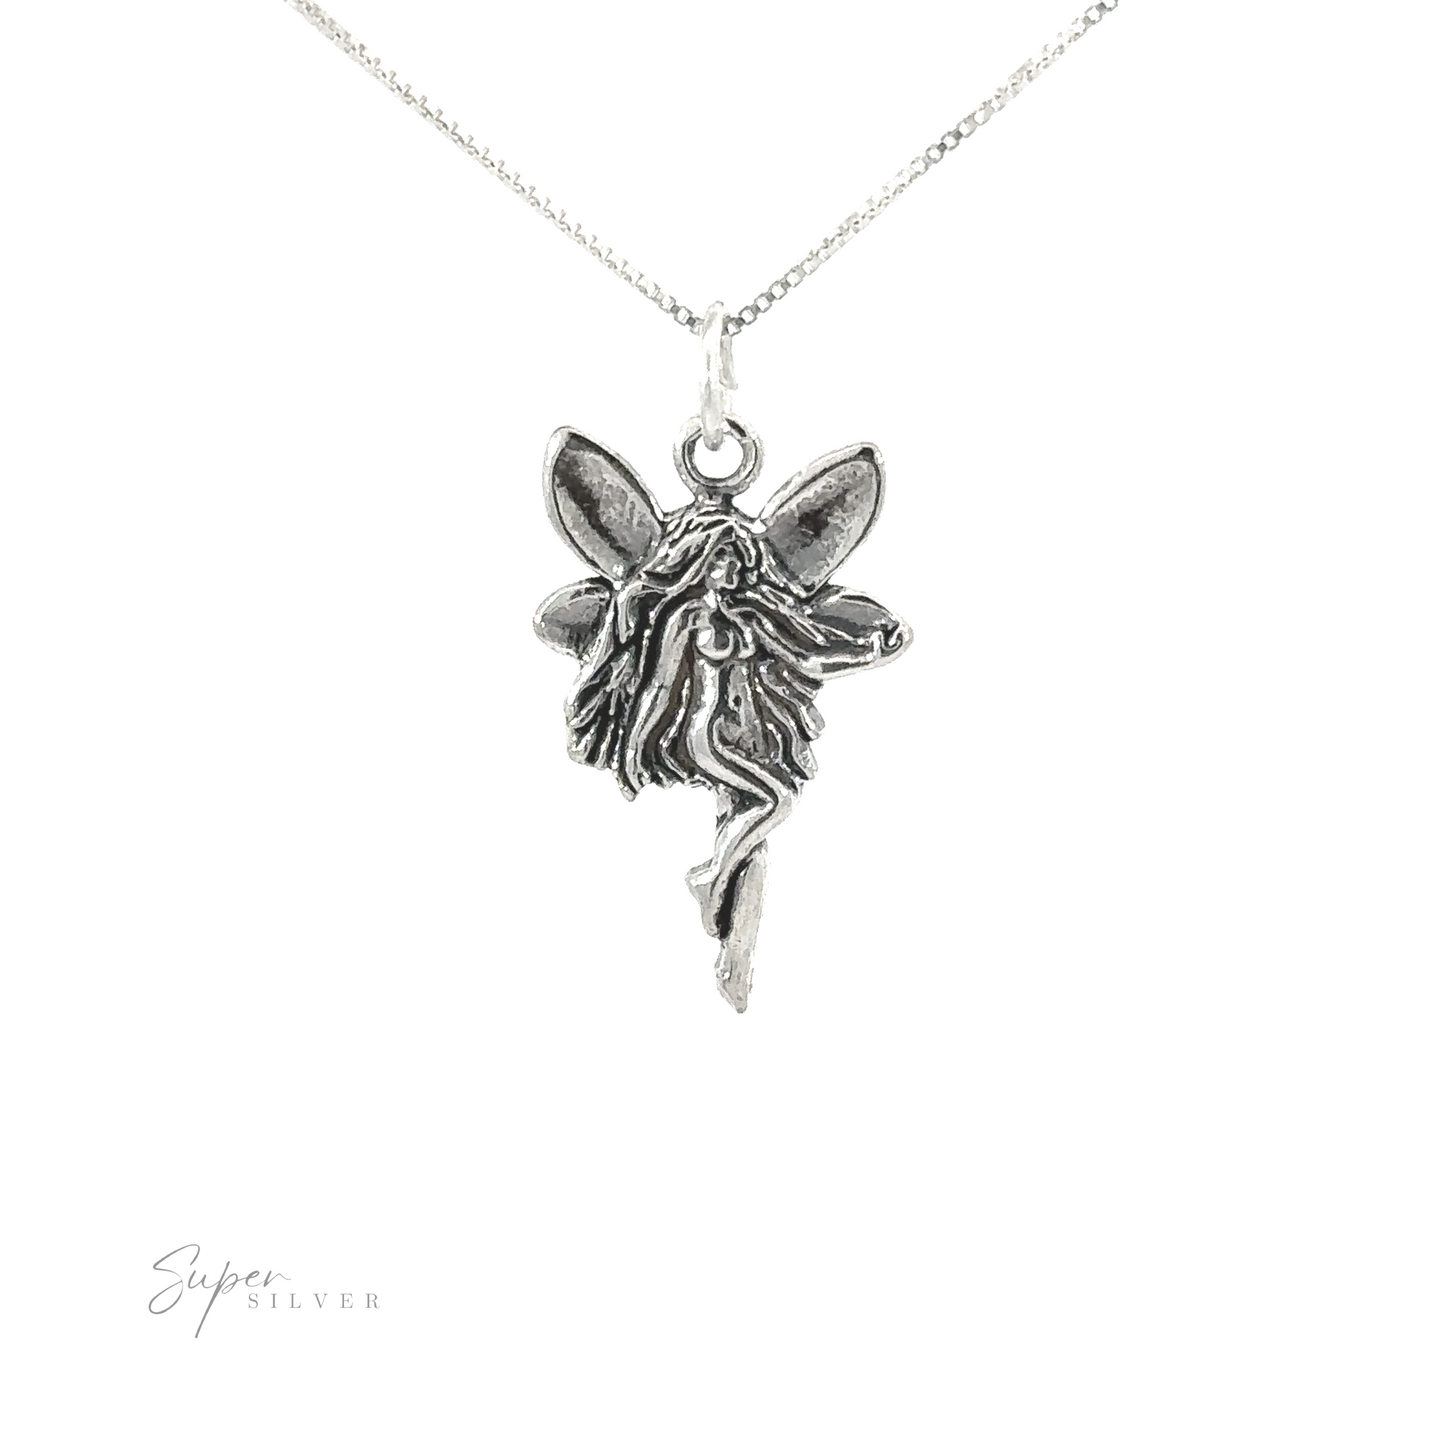 A silver pendant with a Sideways Facing Fairy Charm on it.